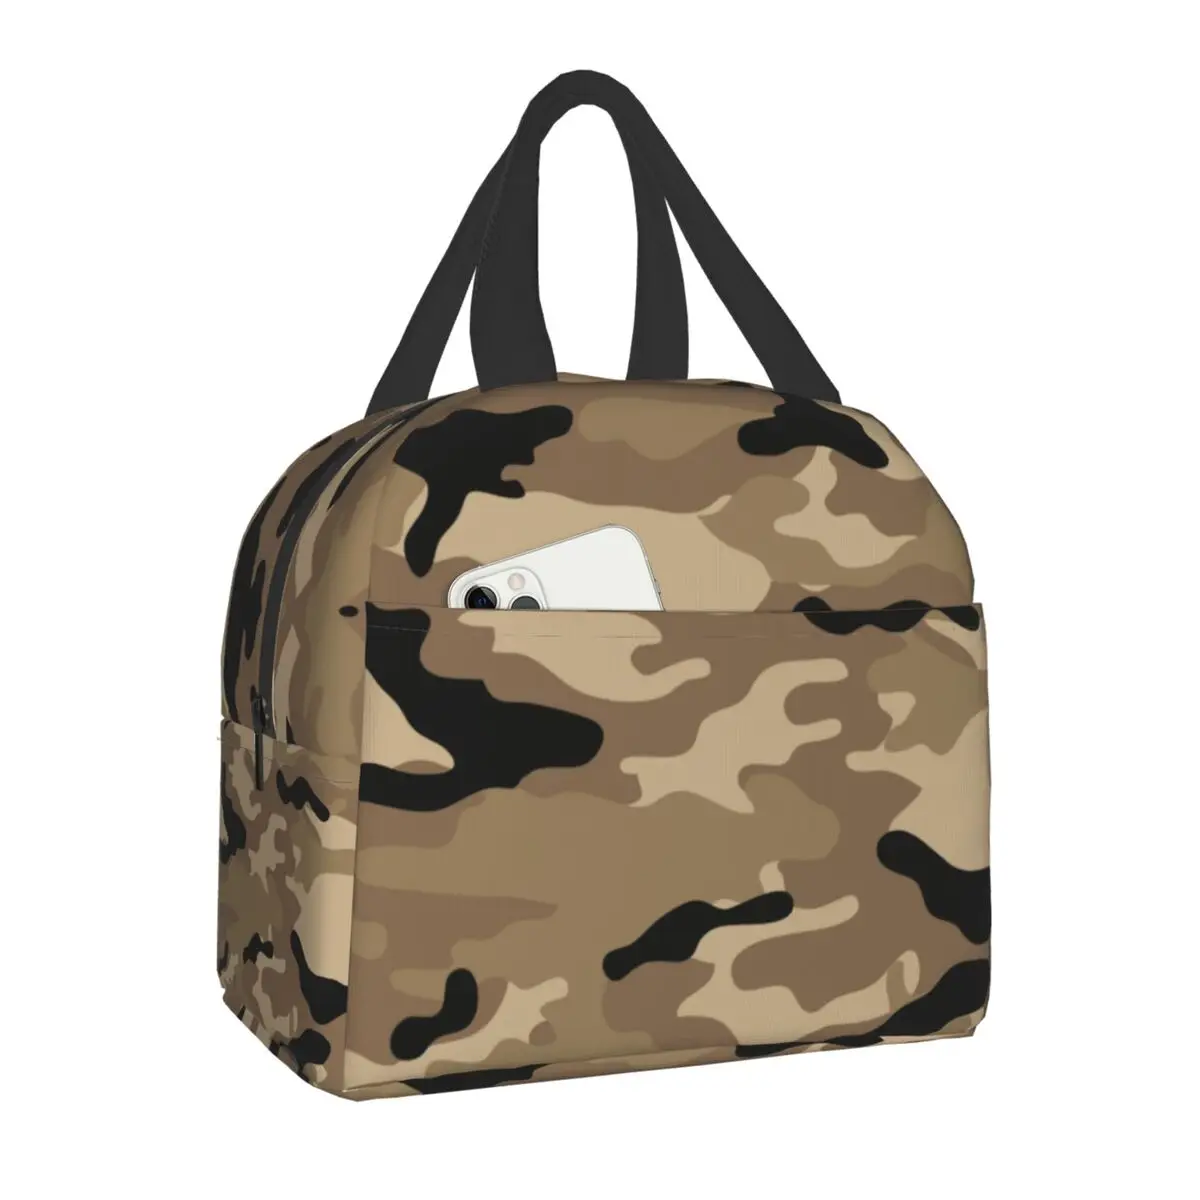 Brown Woodland Camo Thermal Insulated Lunch Bags Women Army Military Camouflage Portable Lunch Tote for Outdoor Picnic Food Box